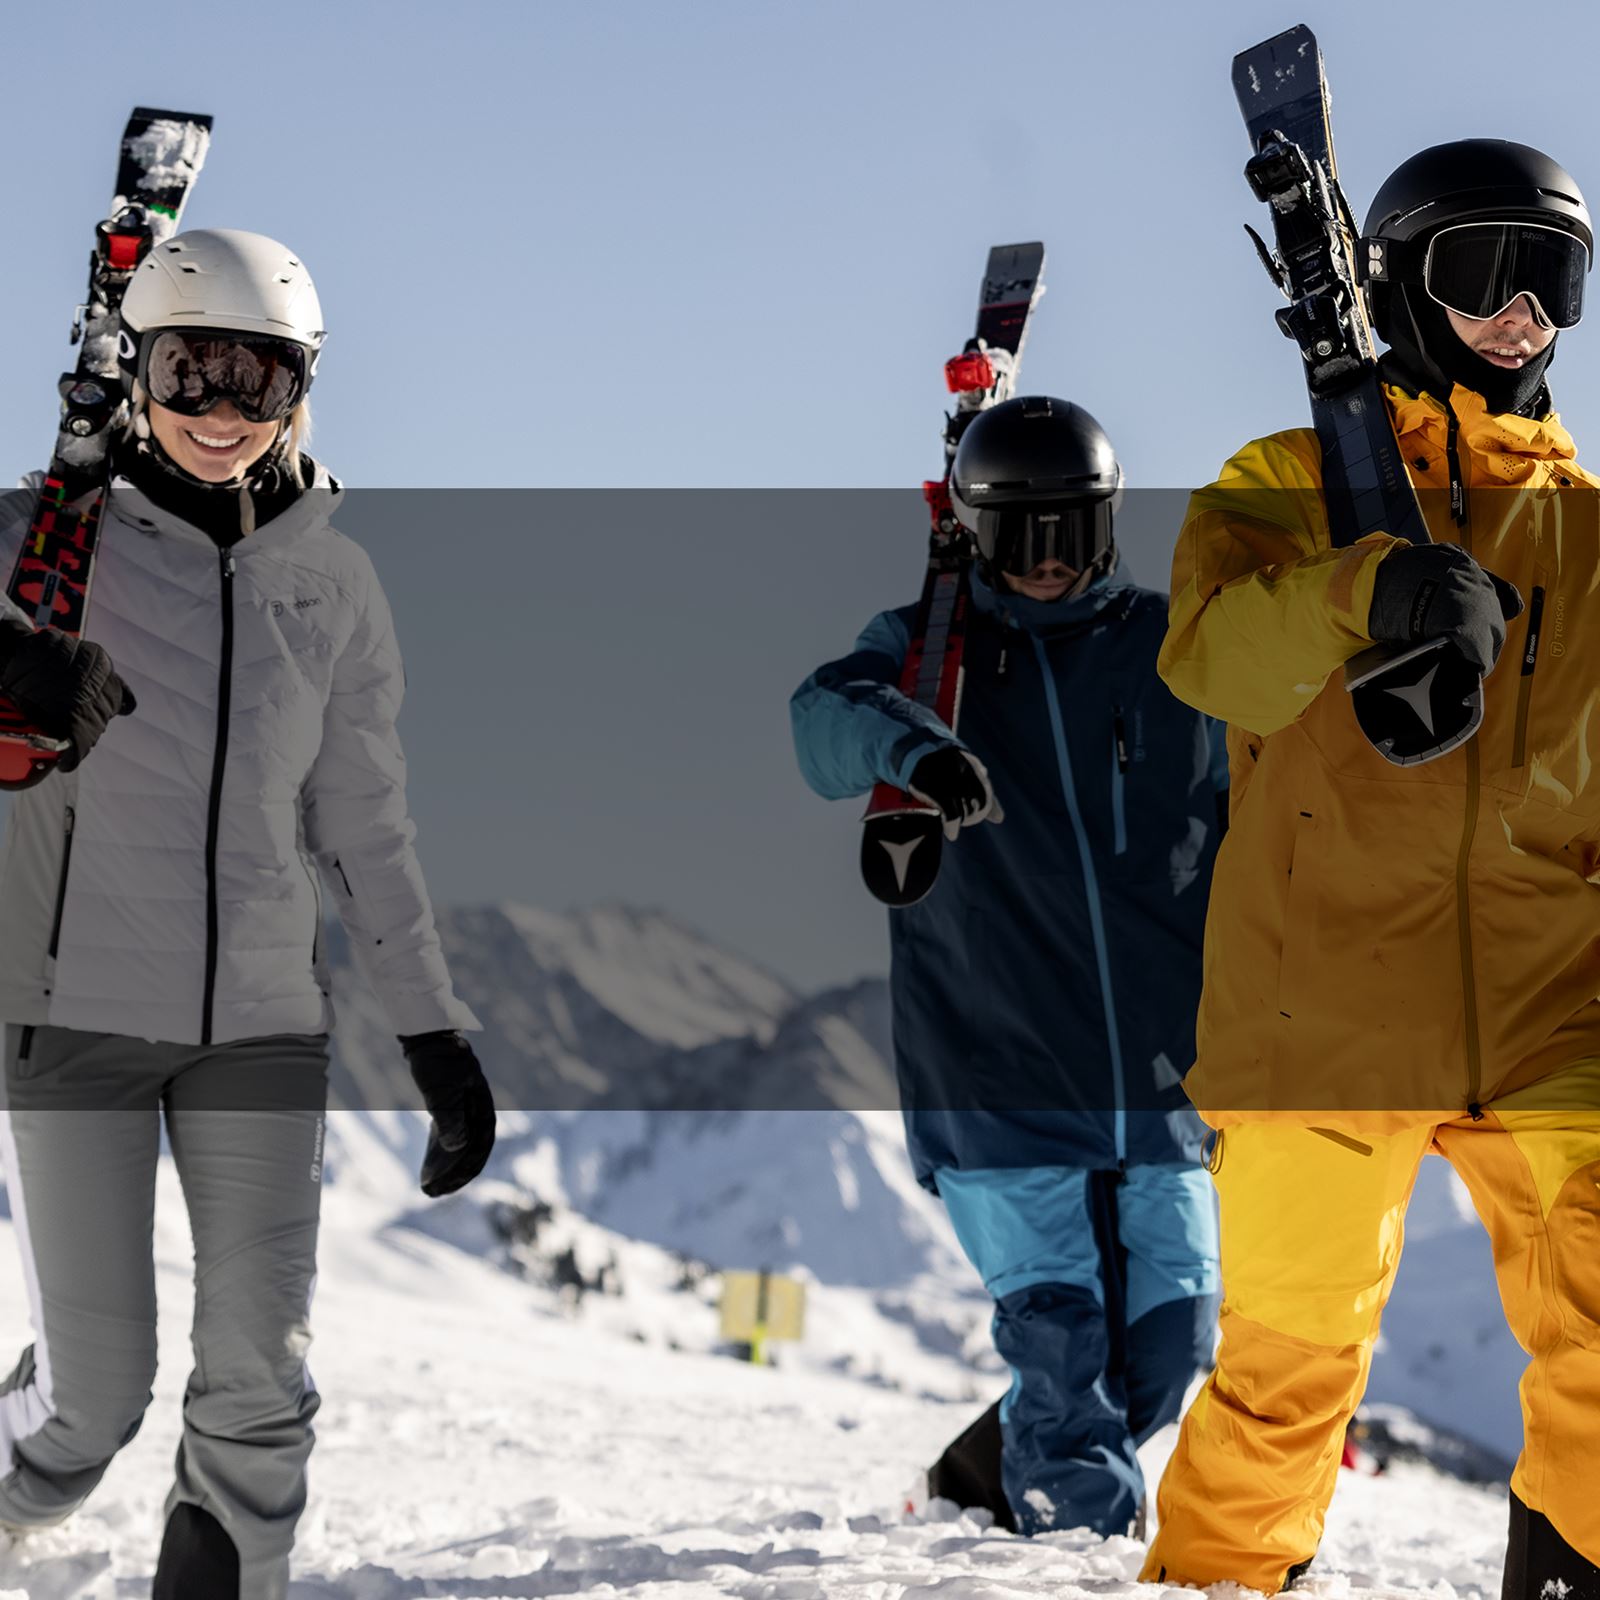 Snowboarding Gear Sale, Up to 50% Off!